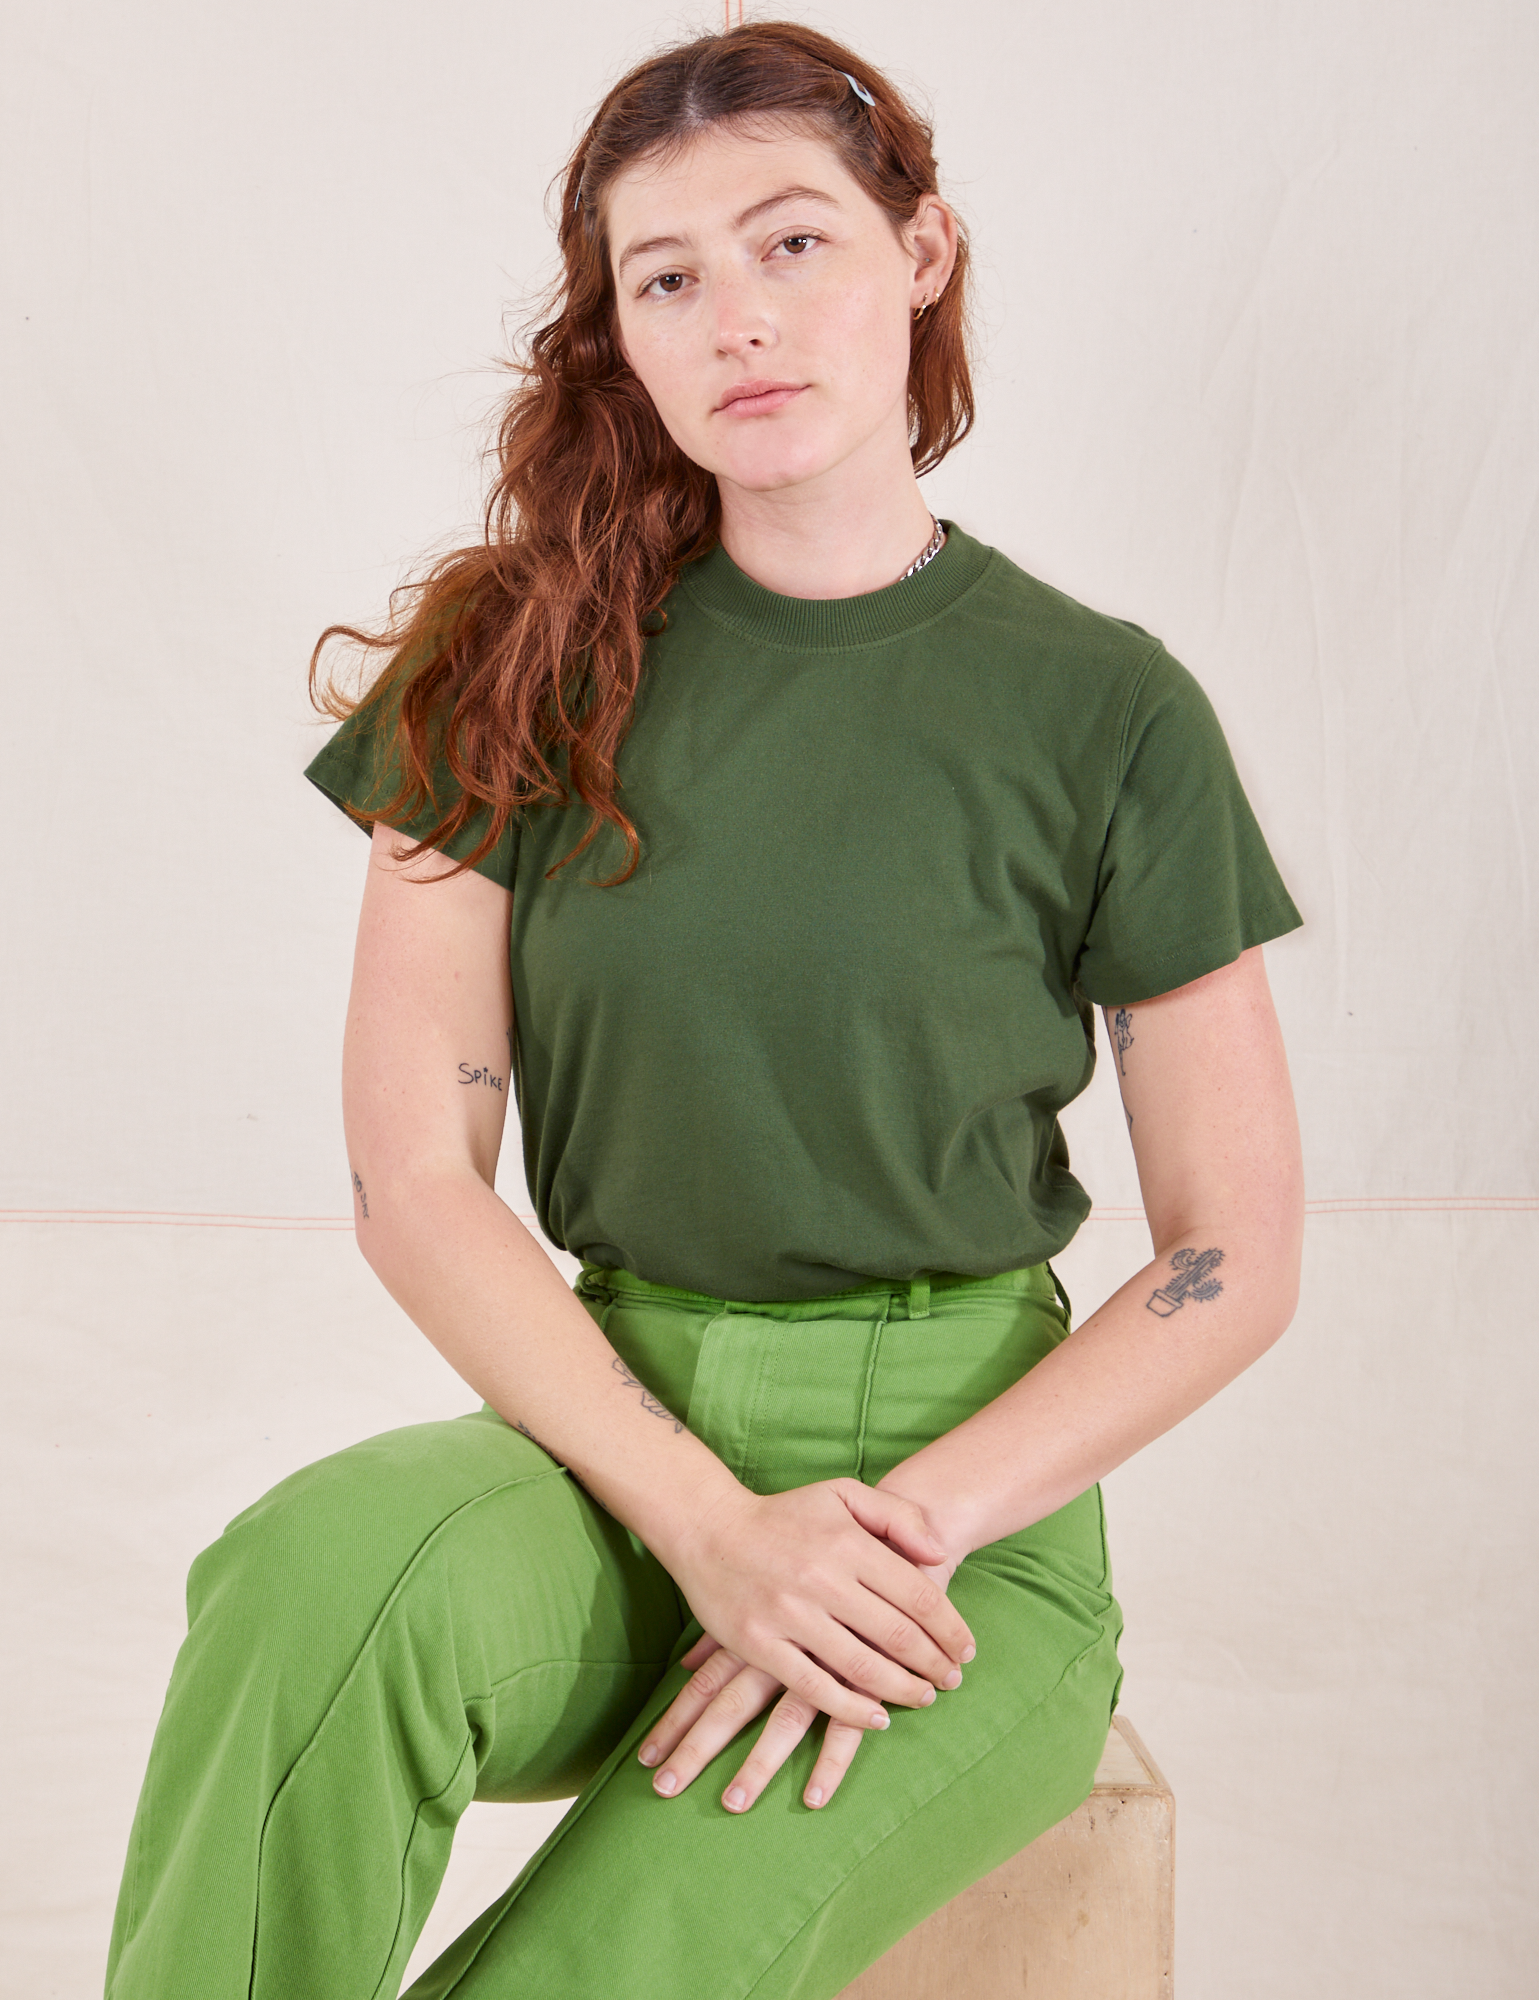 Alex is wearing P Organic Vintage Tee in Dark Emerald Green paired with gross green Western Pants